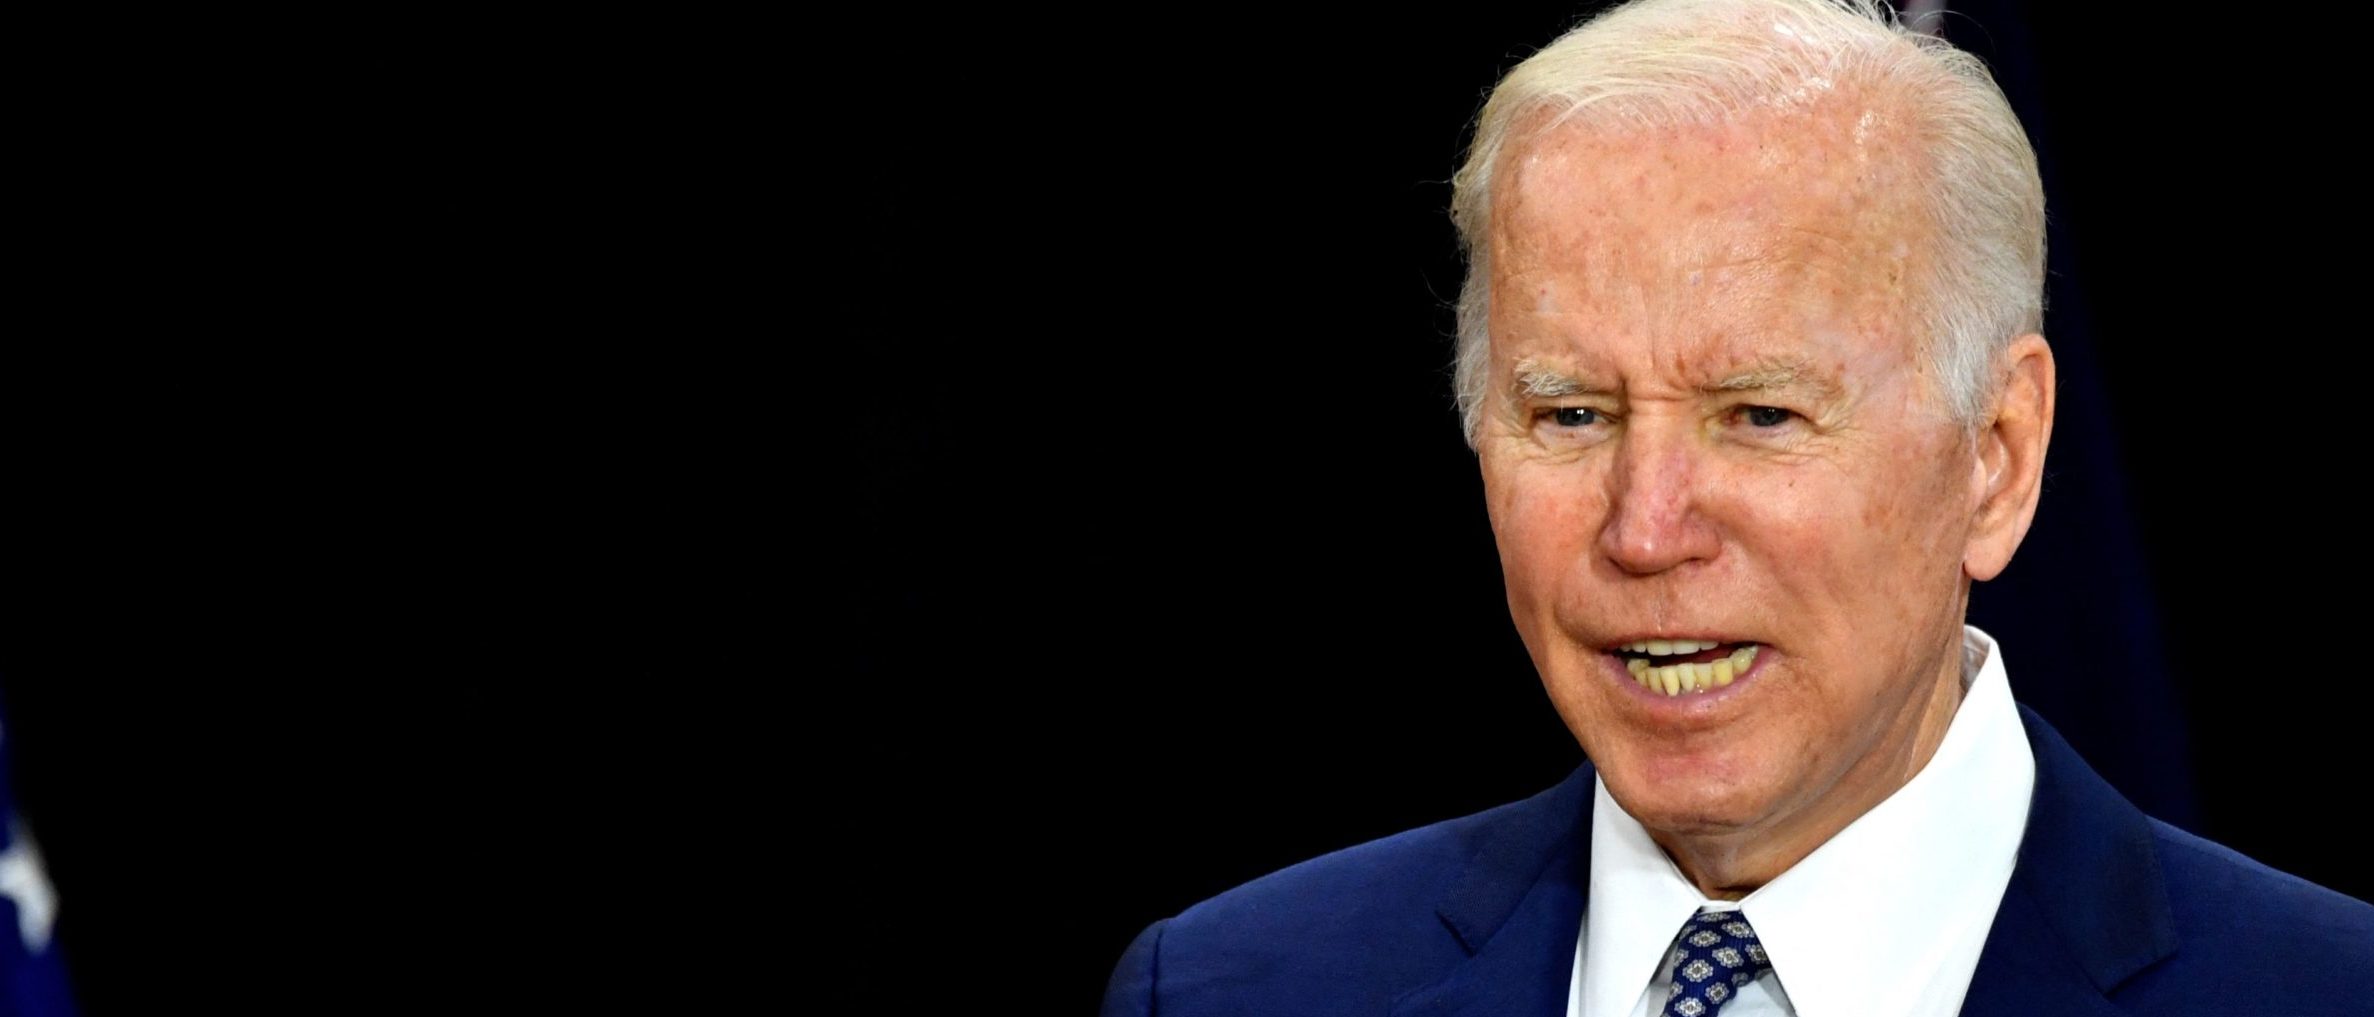 dailycaller.com - Thomas Catenacci - Biden Turns To Venezuelan Dictator For Oil After Canceling US Lease Sales